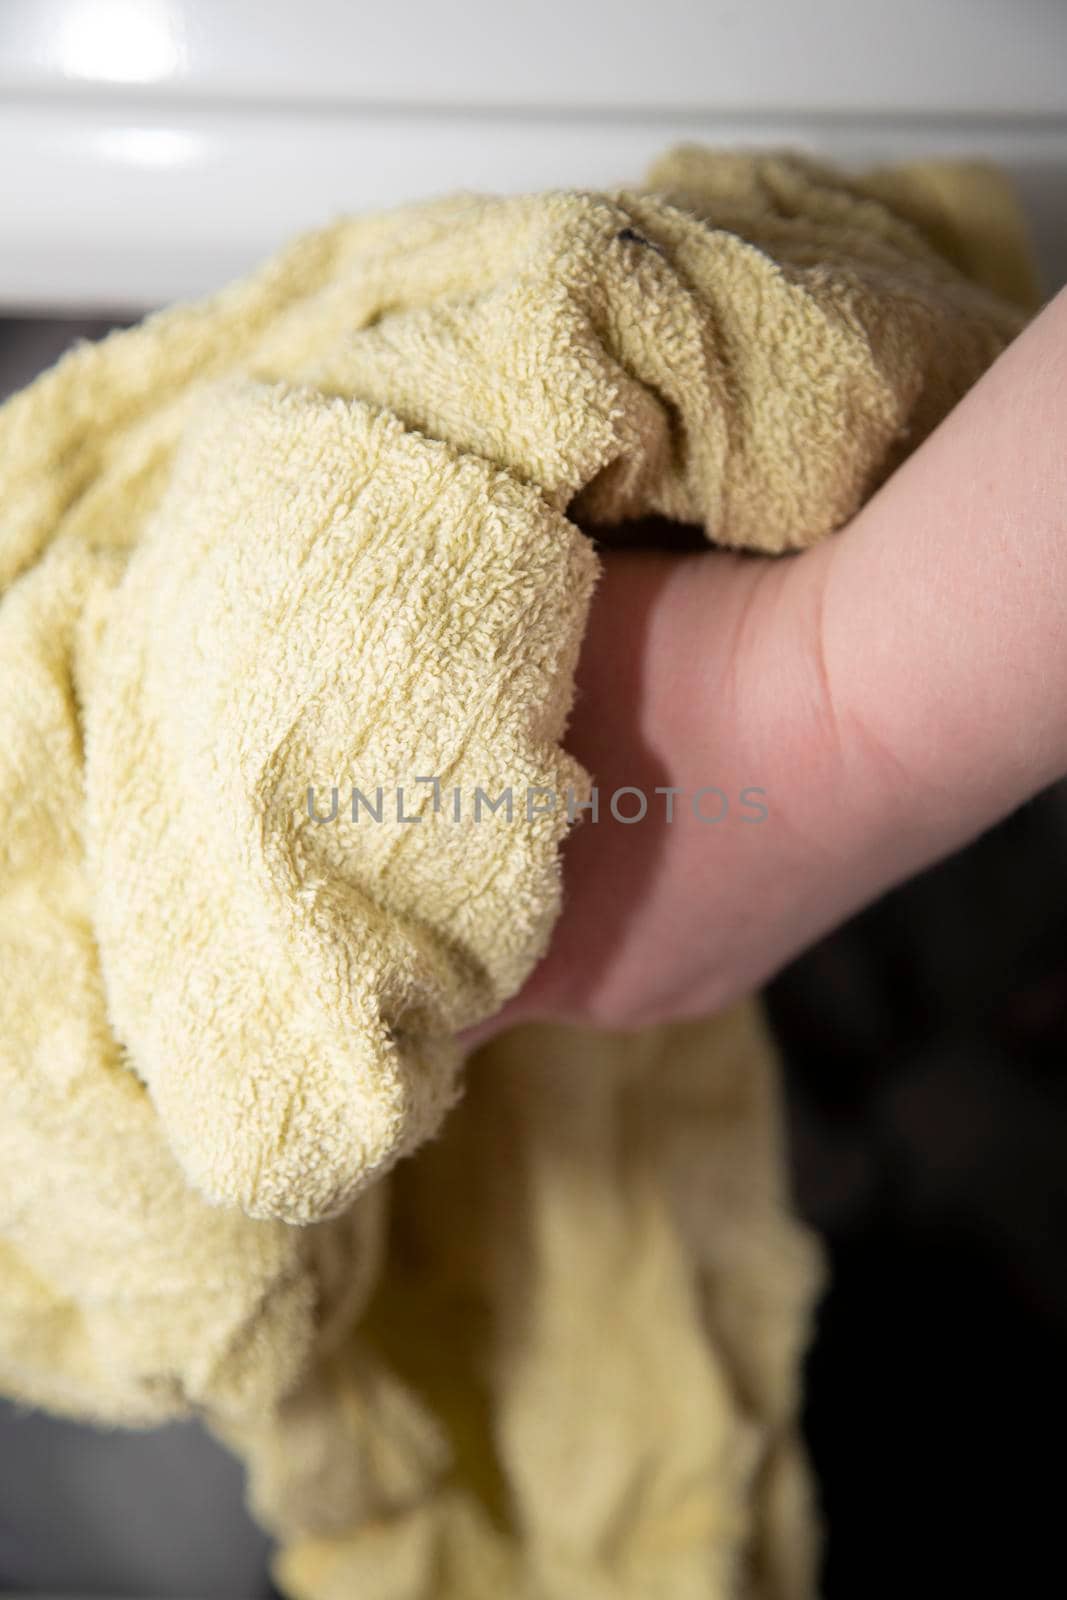 Damp yellow towel being tossed in a dryer